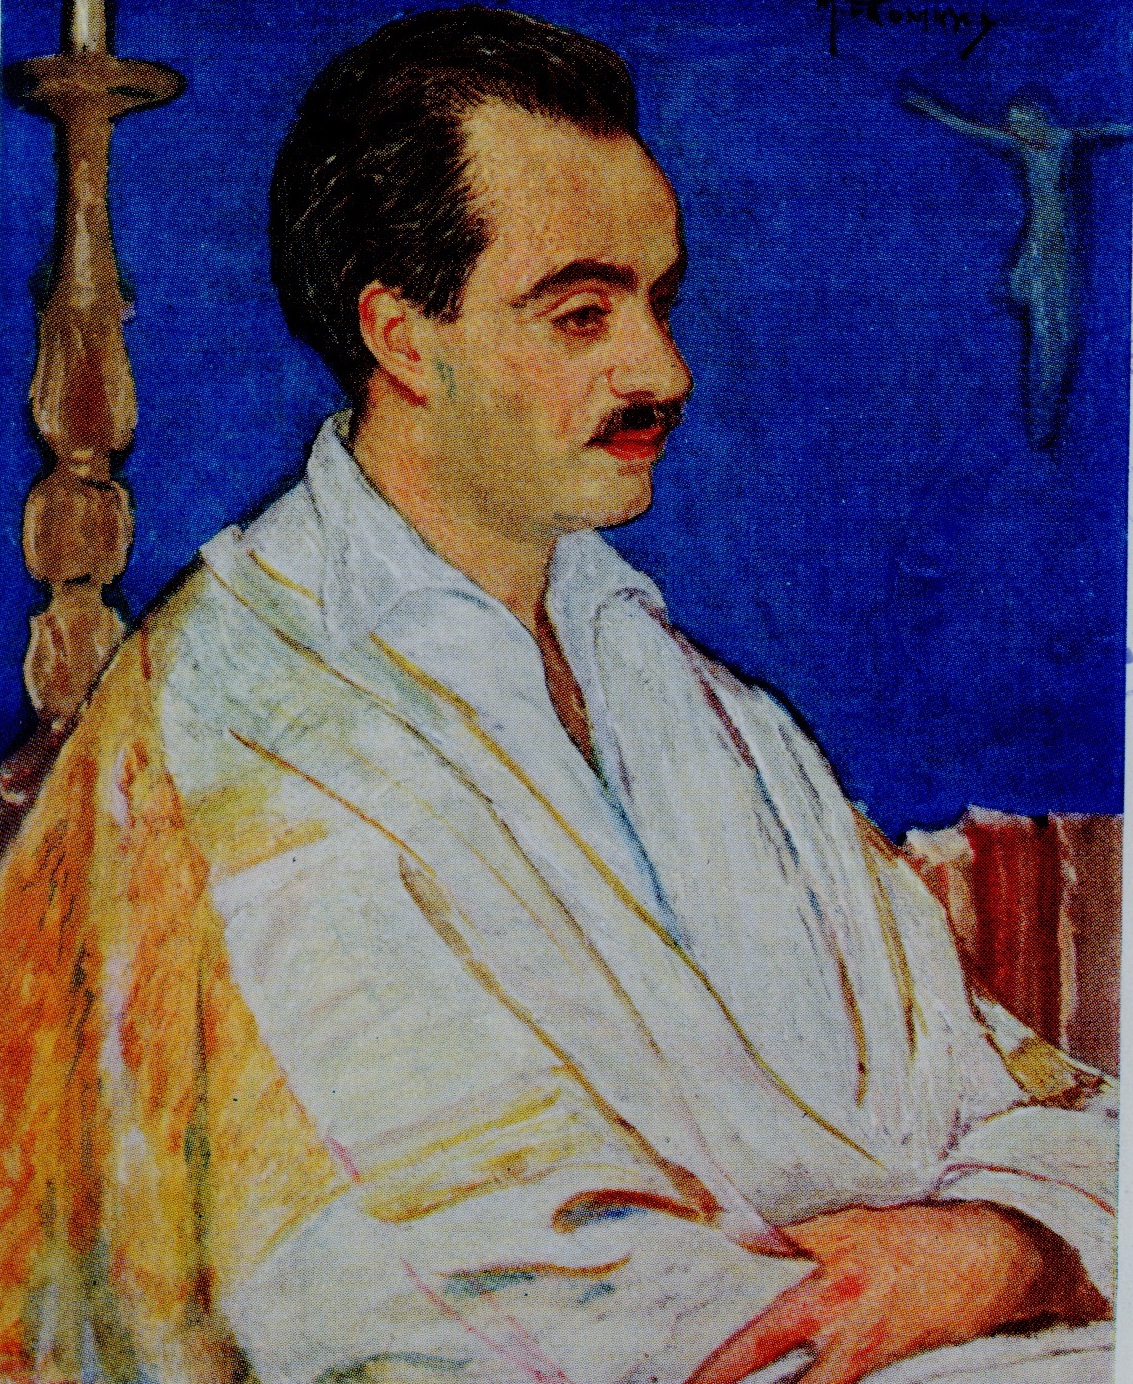 The Syrian Poet (Portrait of Kahlil Gibran), Paintings by Maurice Fromkes, The Art Institute of Chicago [Exhibition Guide], April 15-May 15, 1921.